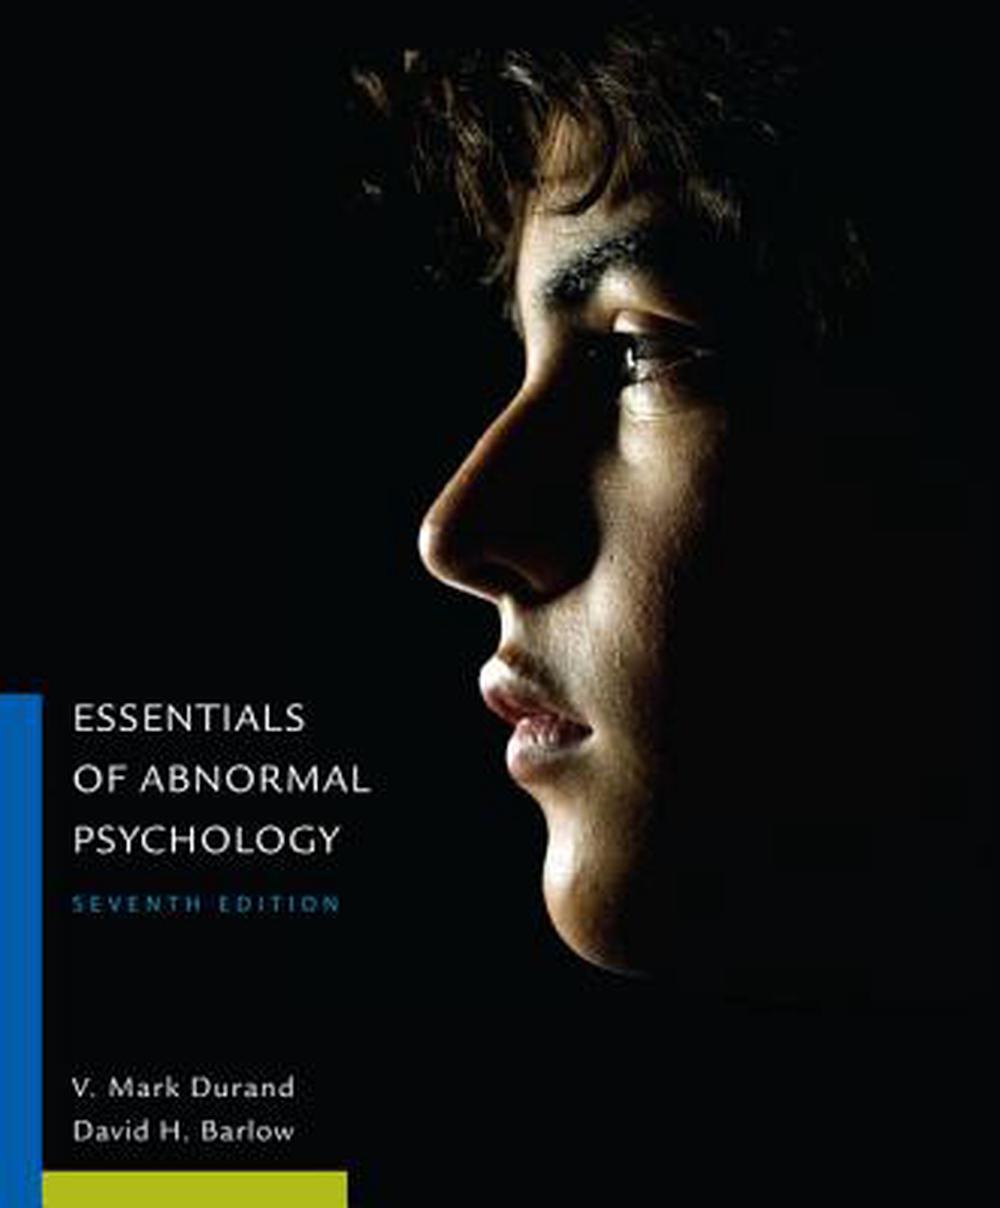 Essentials of Abnormal Psychology, 7th Edition by V. Mark Durand